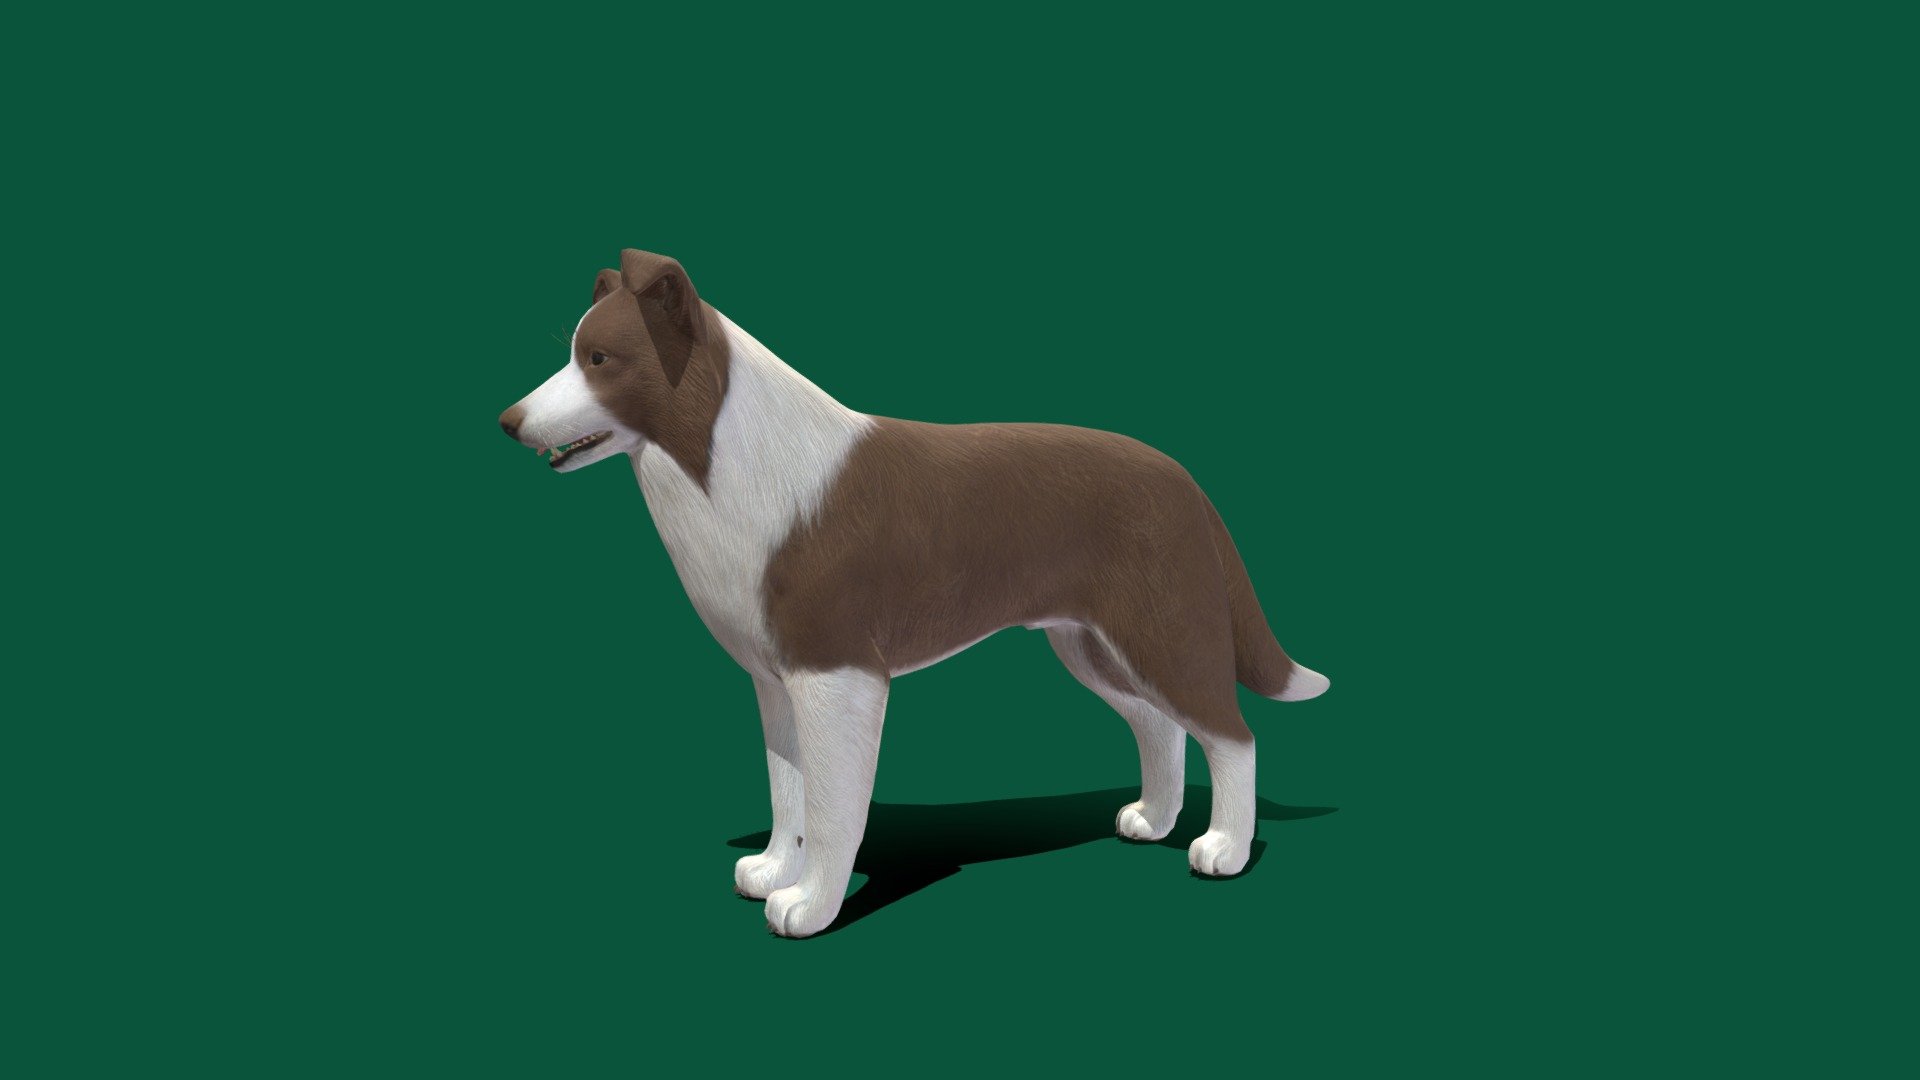 For Sale
The Border Collie is a Northumbrian breed of herding dog of medium size. Widely considered to be the most intelligent dog breed, they are descended from landrace sheepdogs once found all over the British Isles, but became standardised in the Anglo-Scottish border region - Border Collie - 3D model by Nyilonelycompany 3d model